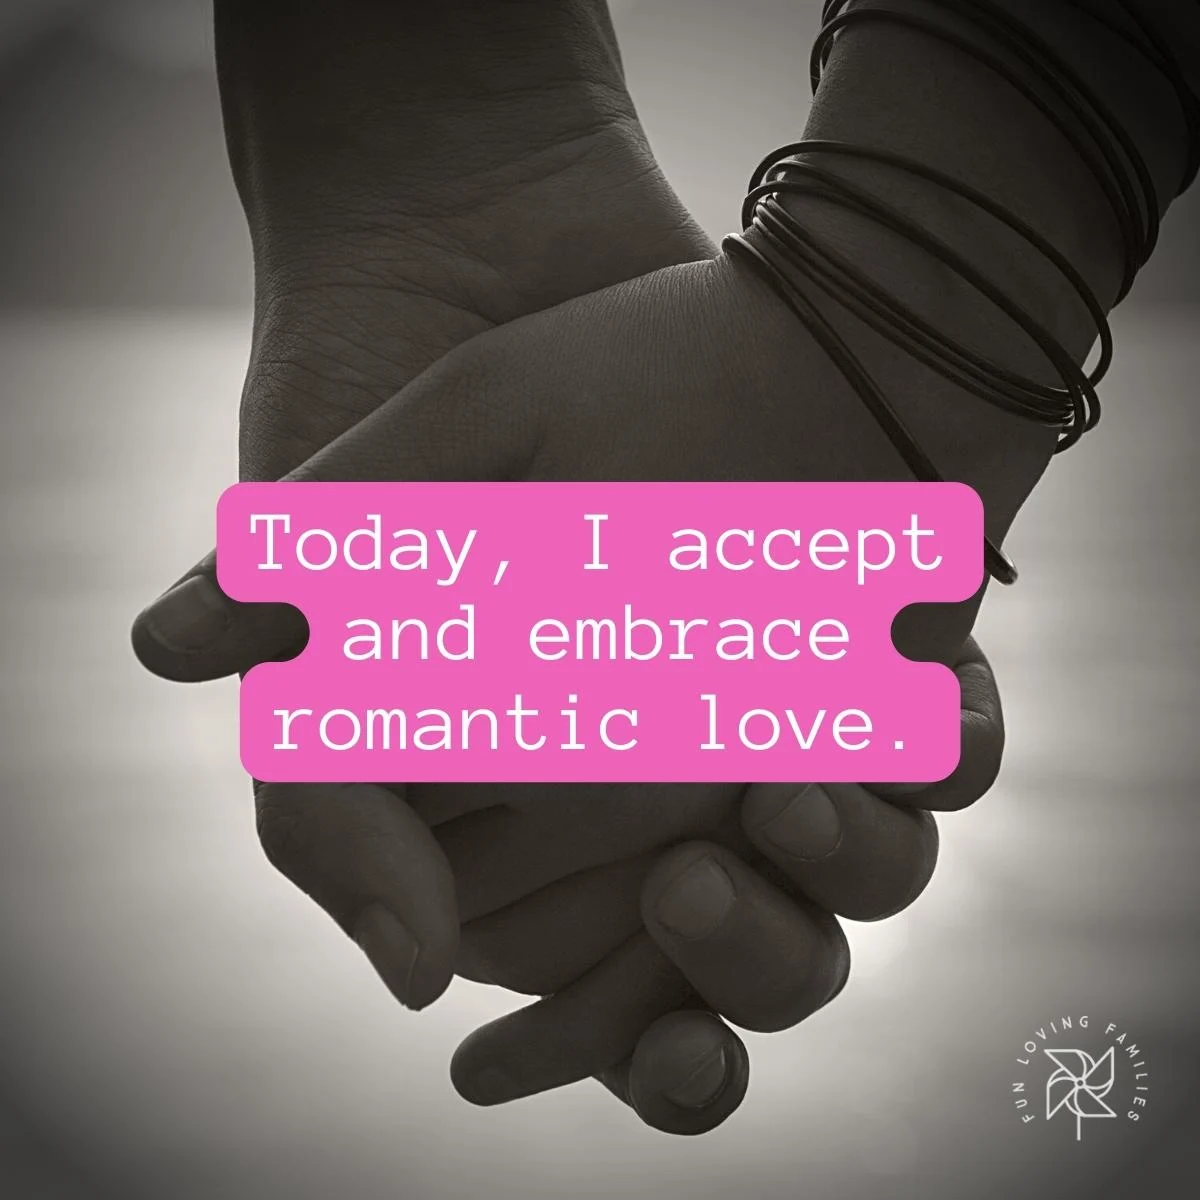 Today, I accept and embrace romantic love affirmation